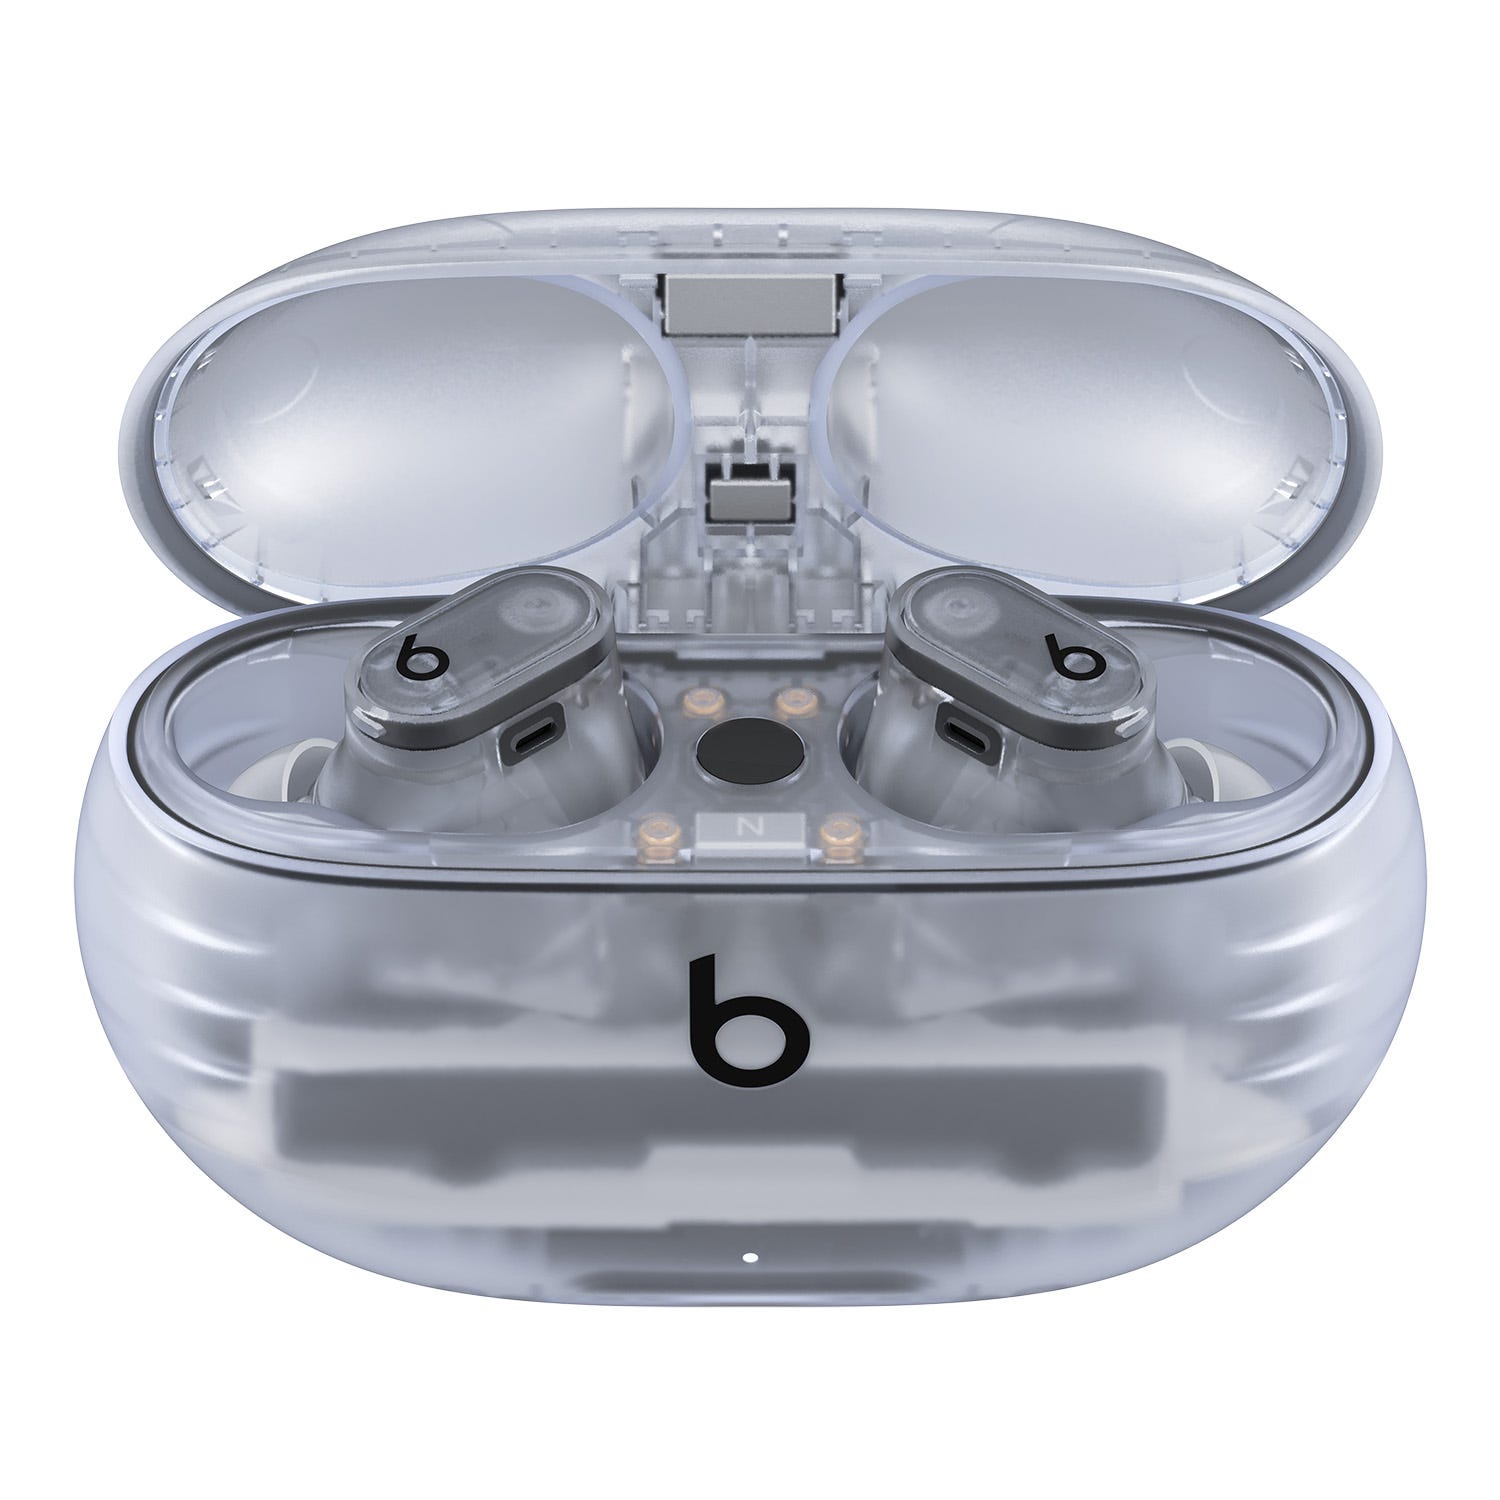 Dre by Buds Beats Studio + Wireless Dr. Transparent Noise-Canceling MQLK3LL/A Earbuds,